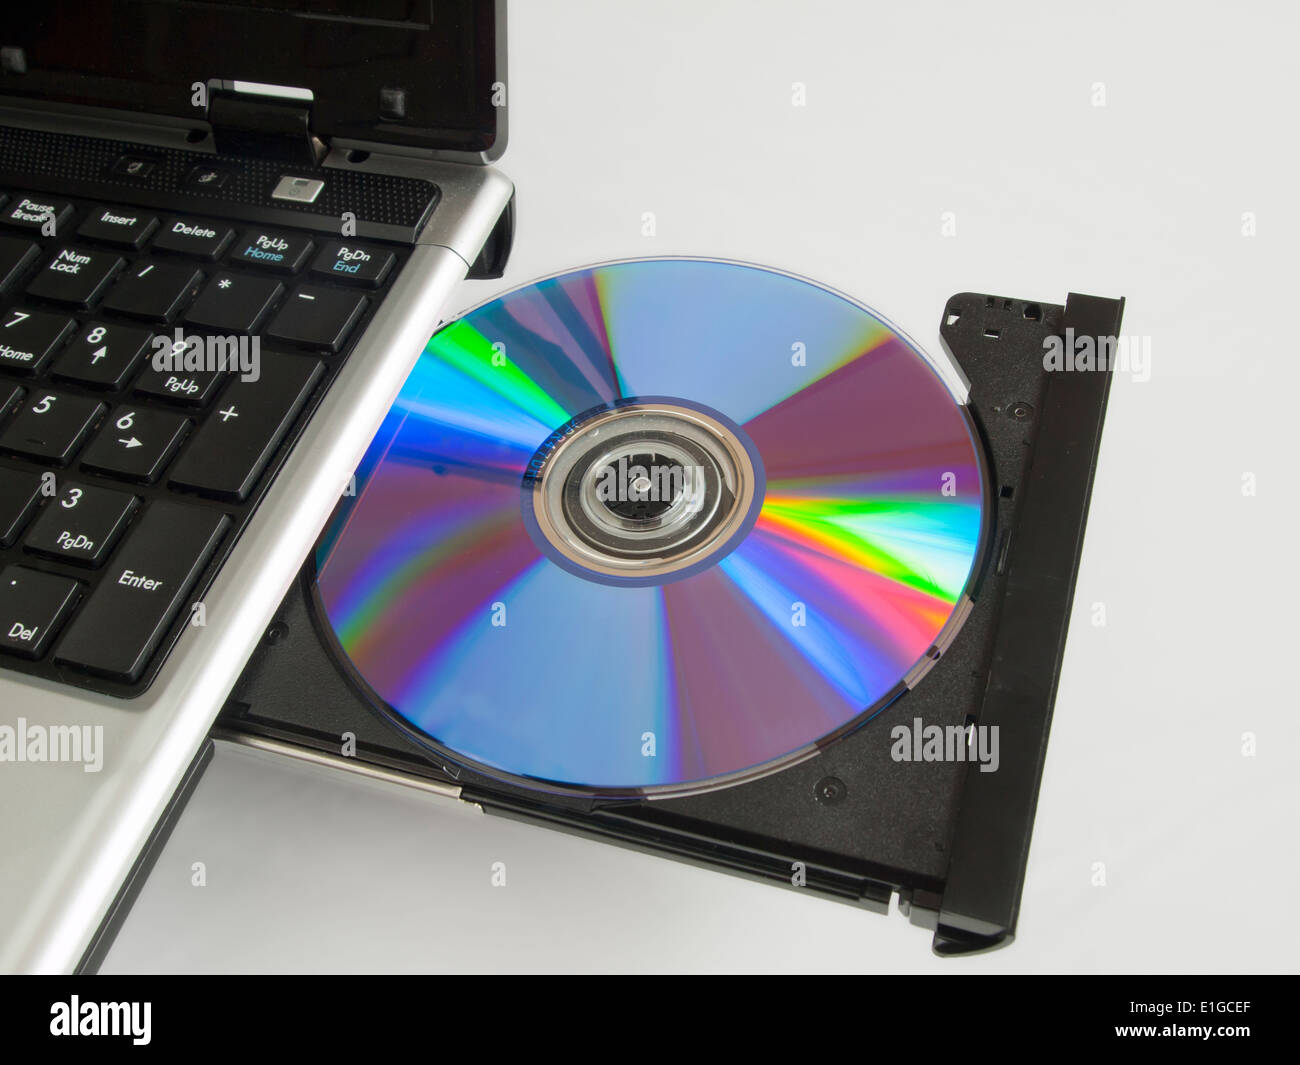 A rewritable CD ROM in the CD drive of a labtop computer. Stock Photo